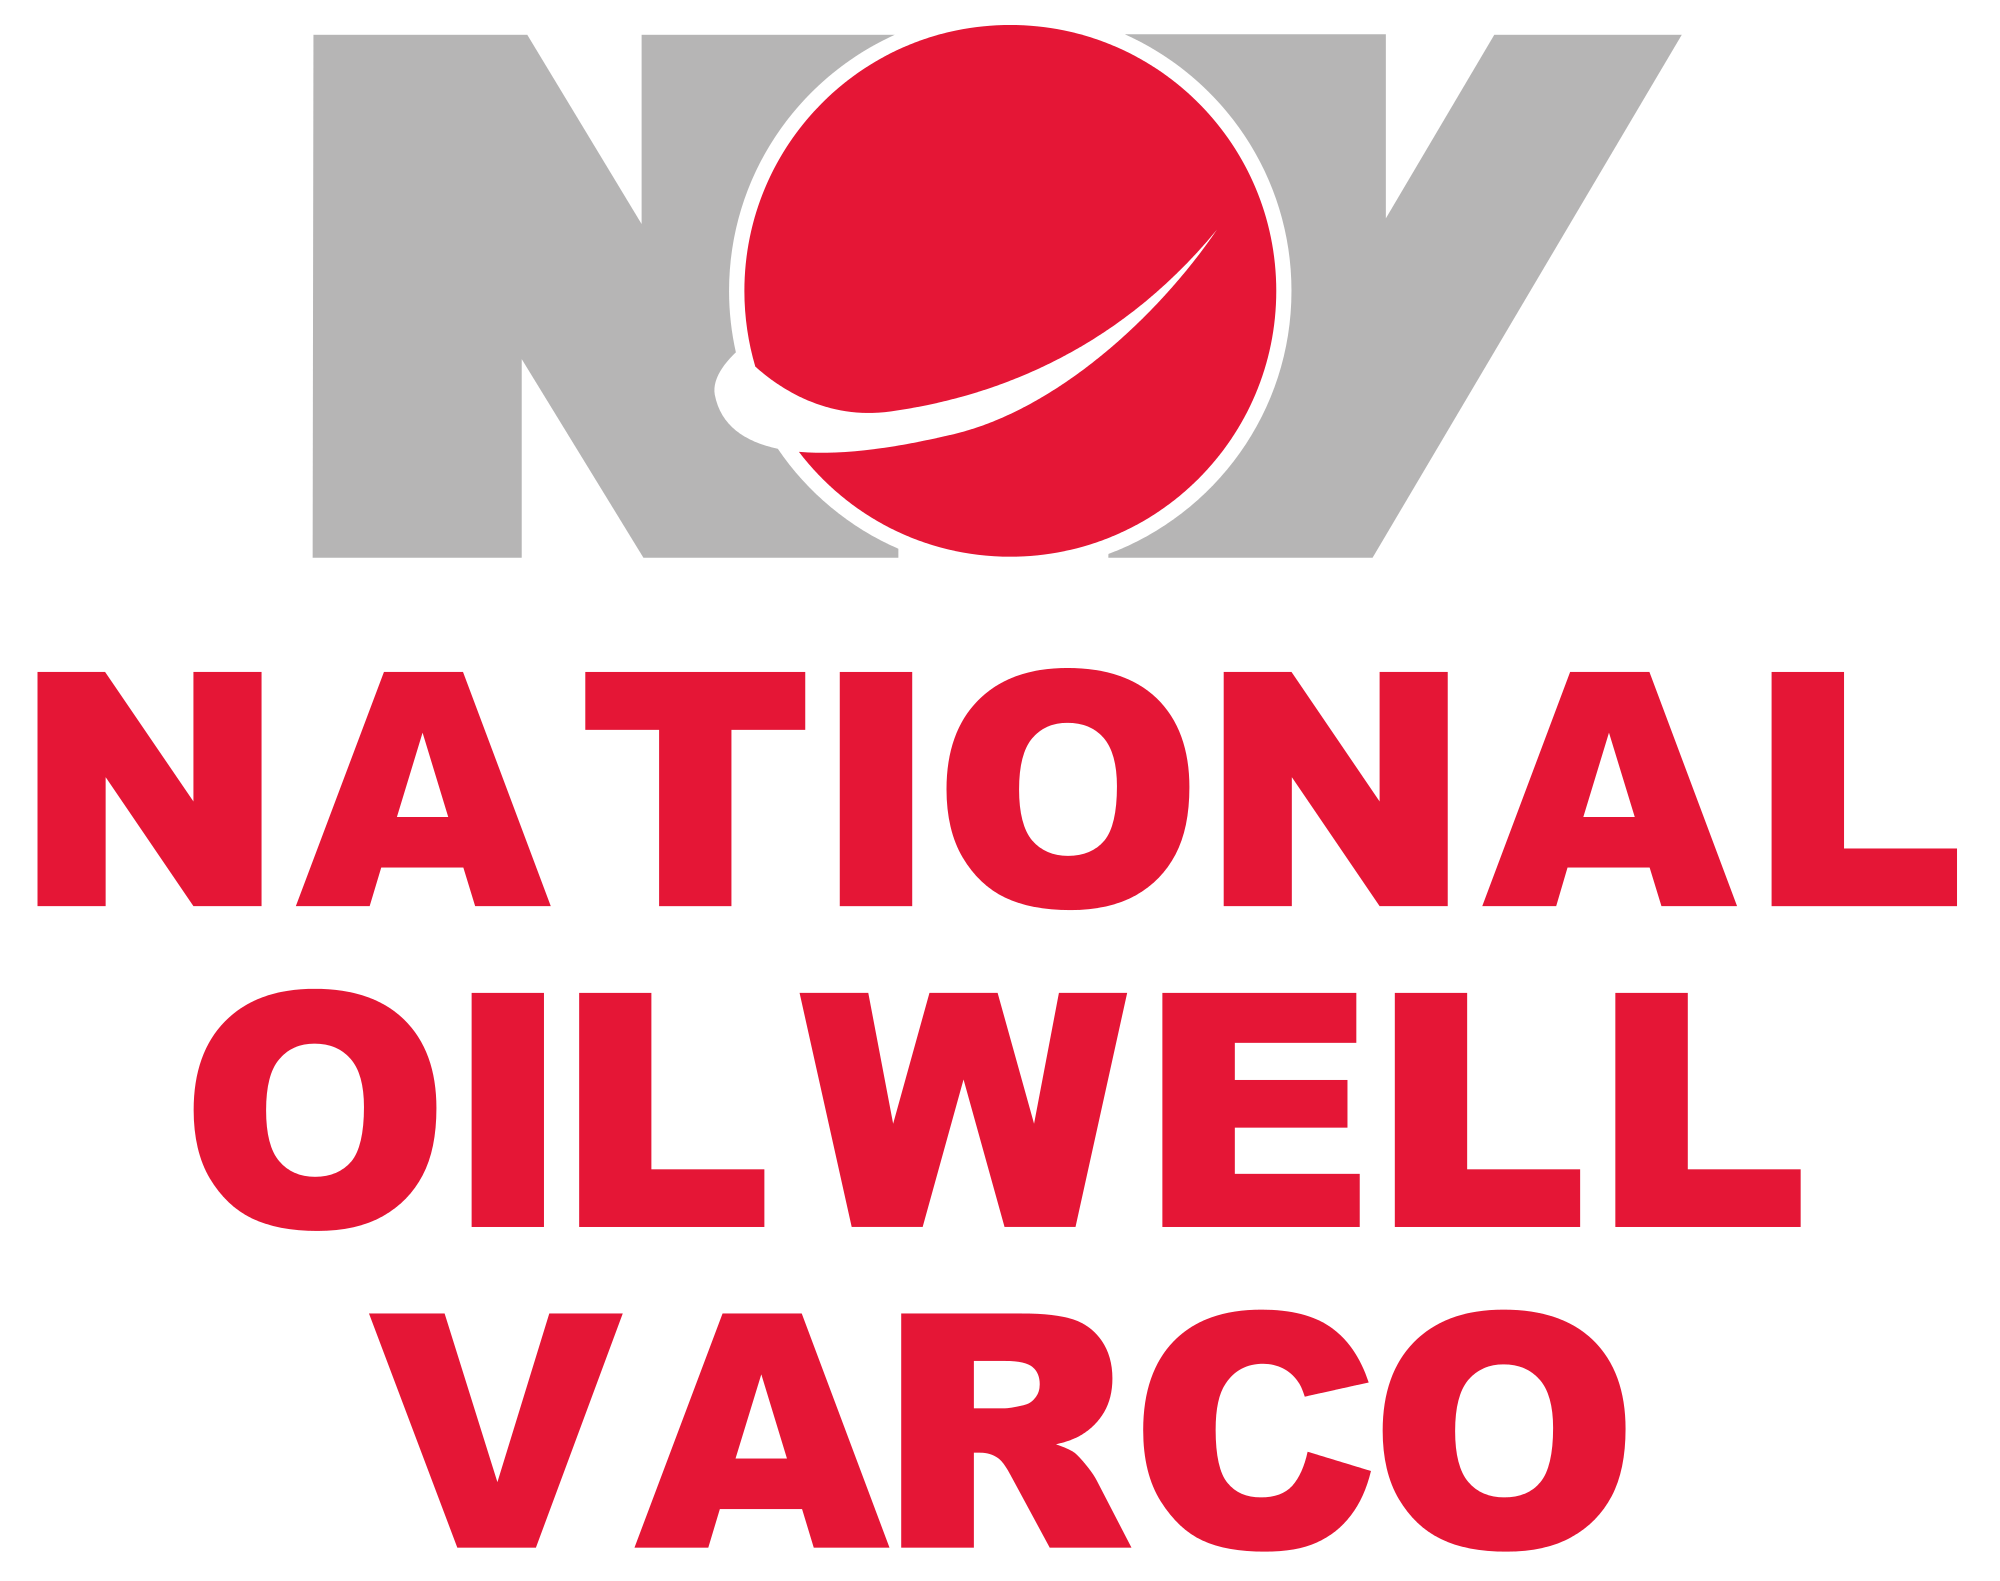 National-Oilwell-Varco-